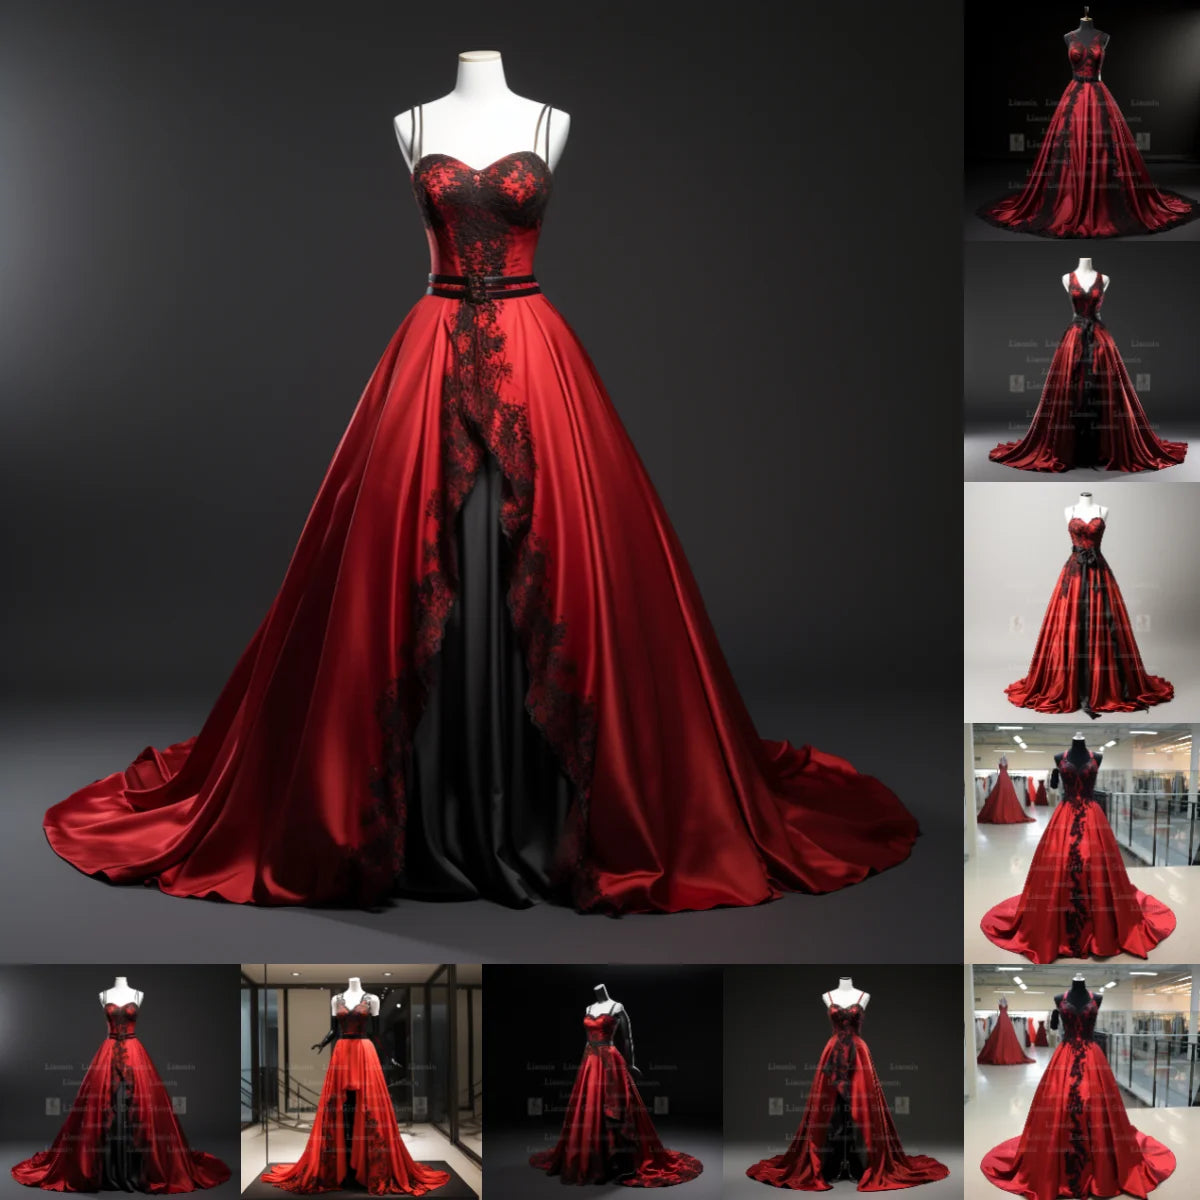 Red Satin With Black Lace Edge Applique Floor Length Lace Up Evening Dress Brithday Party Elagant Clothing Princess SKirt  W1-13